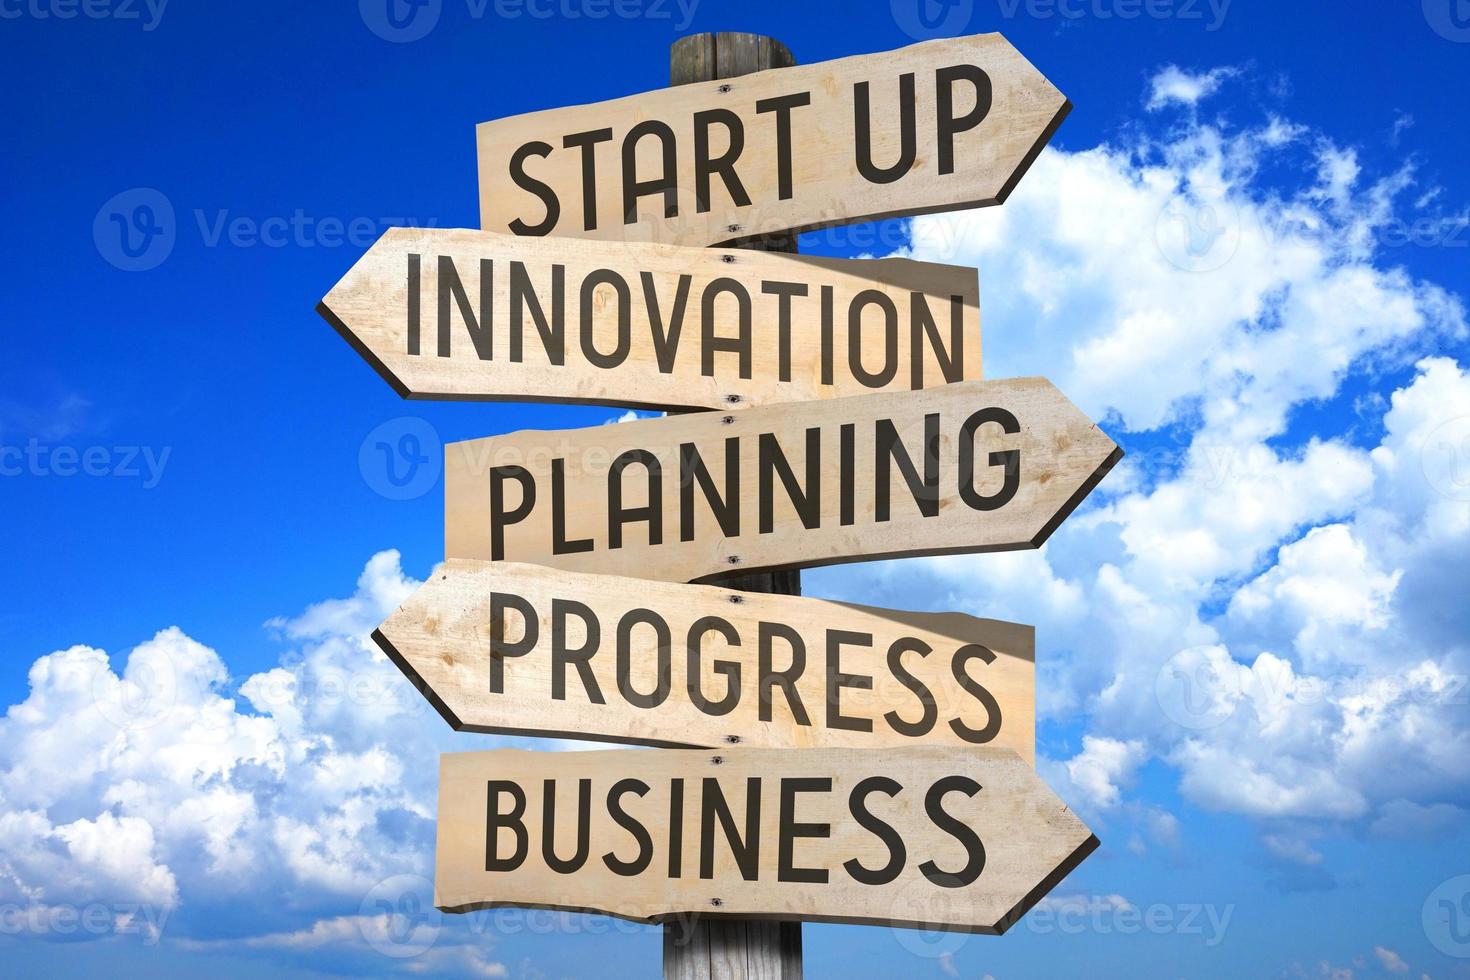 Start Up, Innovation, Planning, Progress, Business - Wooden Signpost with Five Arrows photo